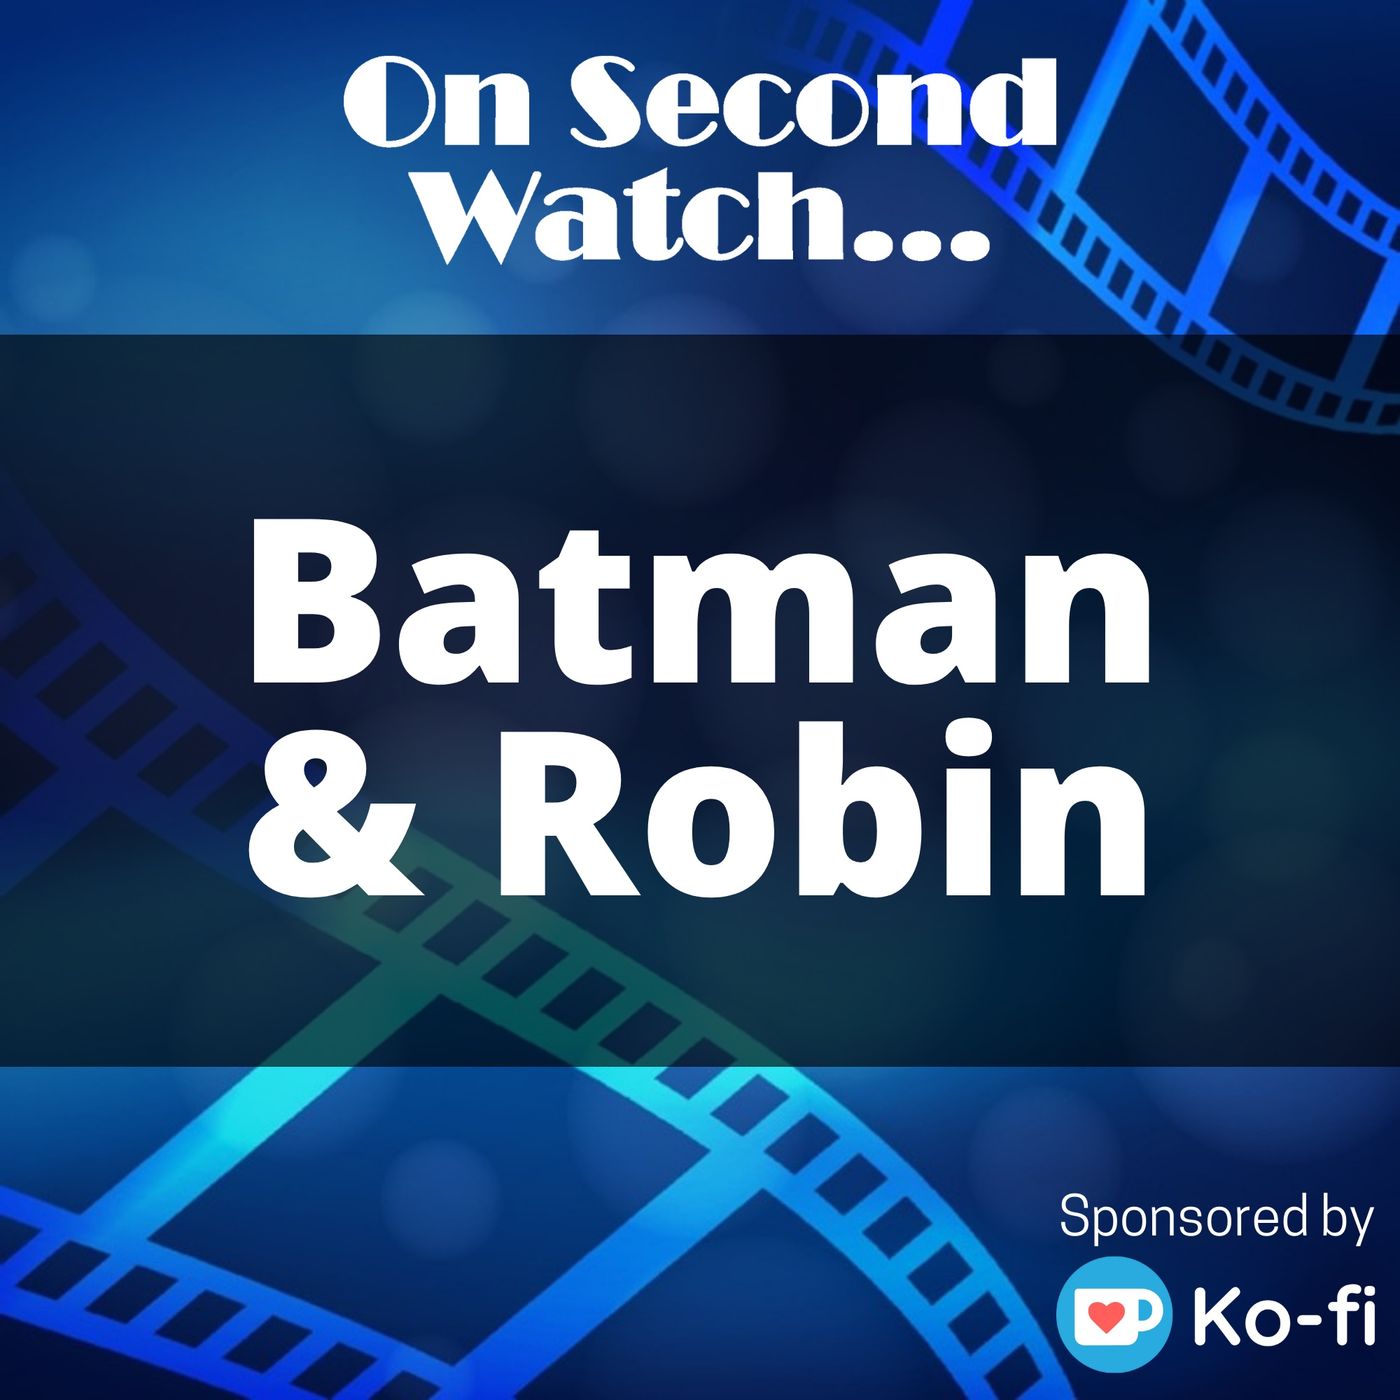 Batman and Robin (1997) - "Let's kick some ice!"